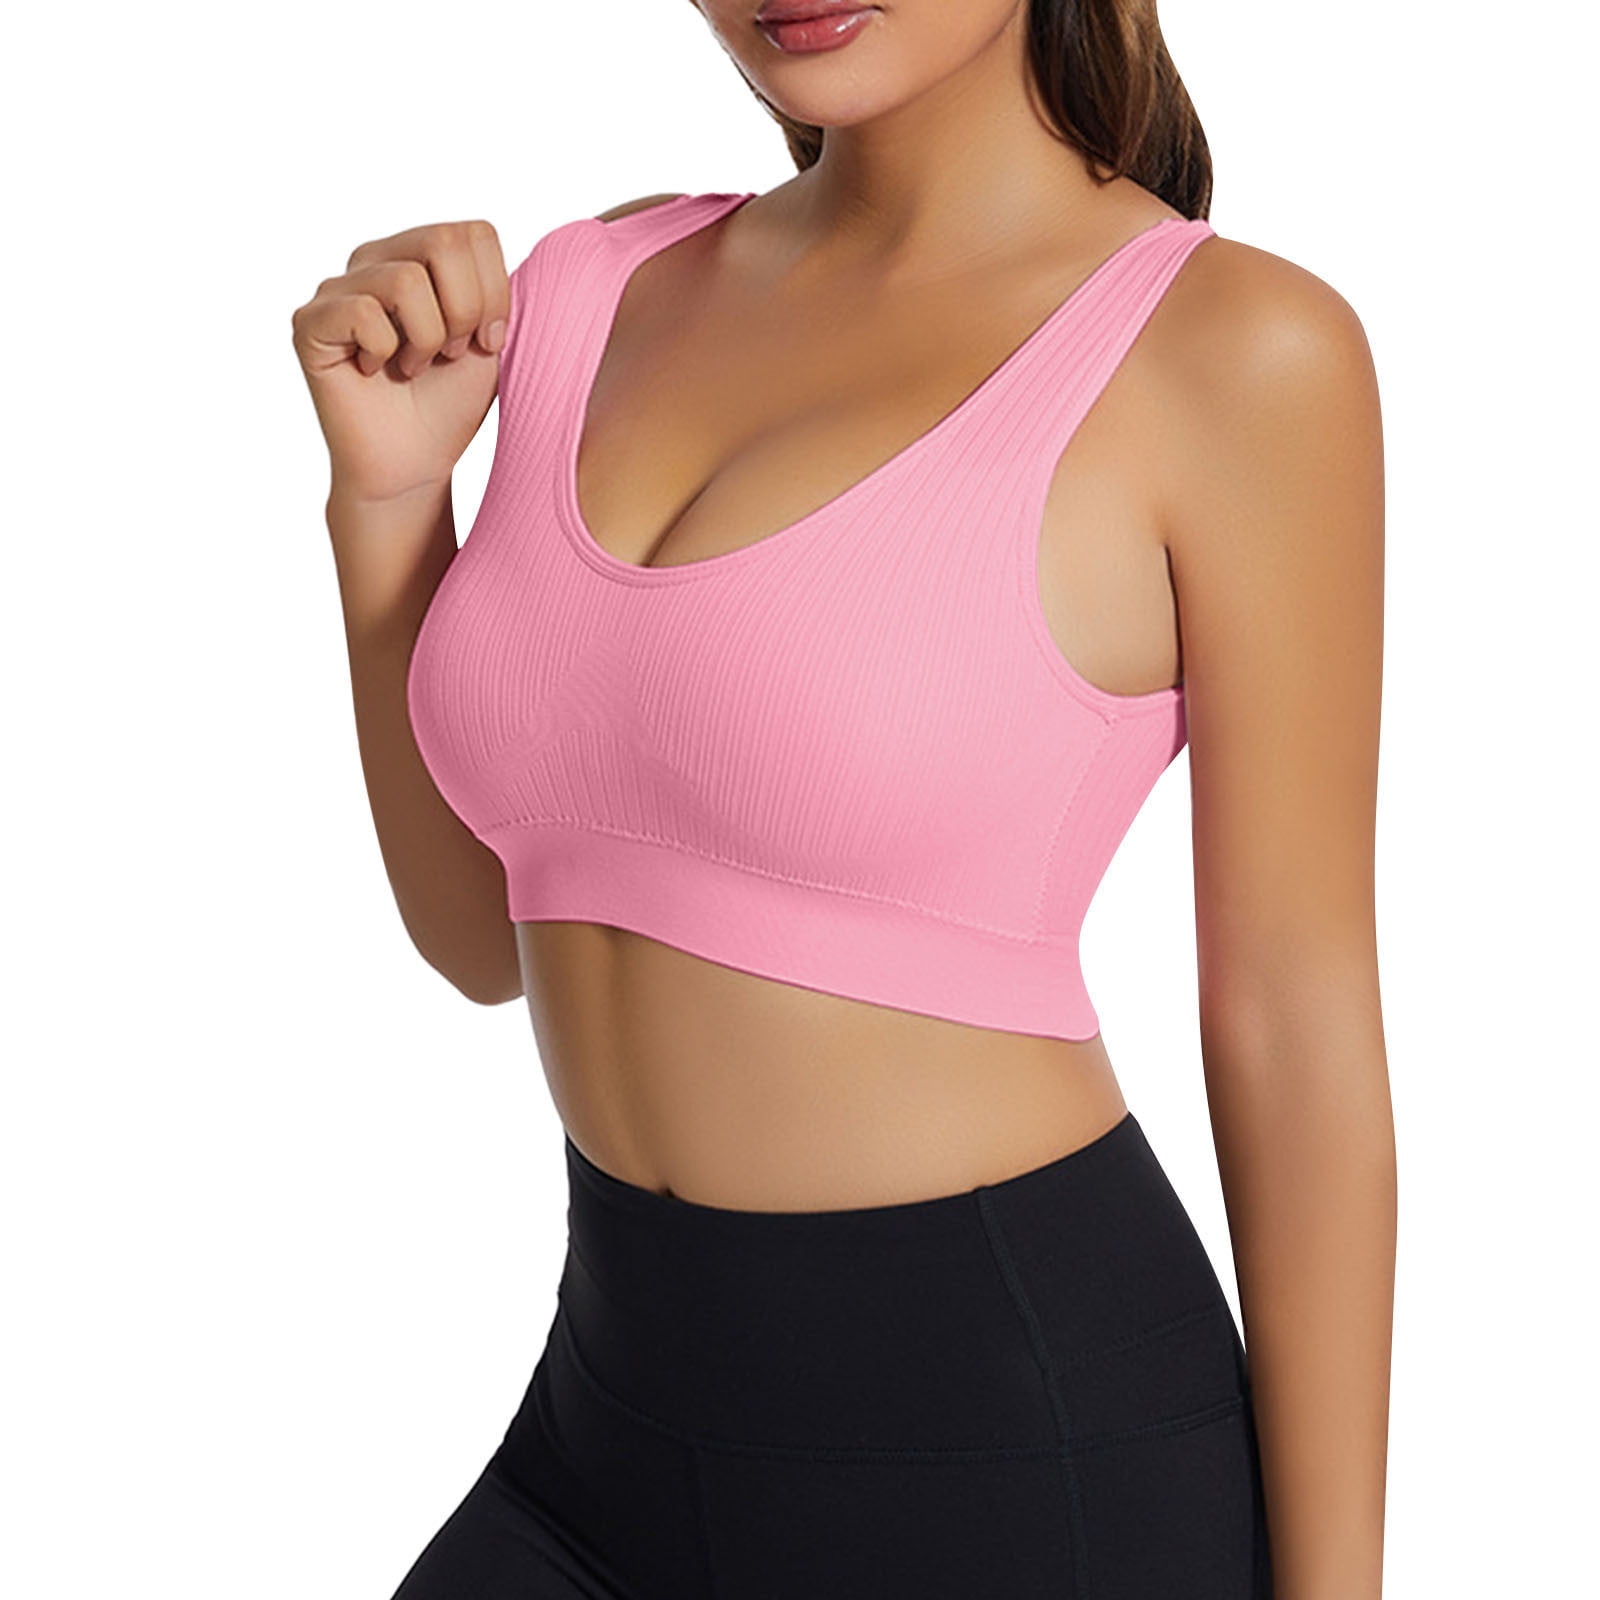 Quealent High Impact Sports Bras For Women Women's Strappy